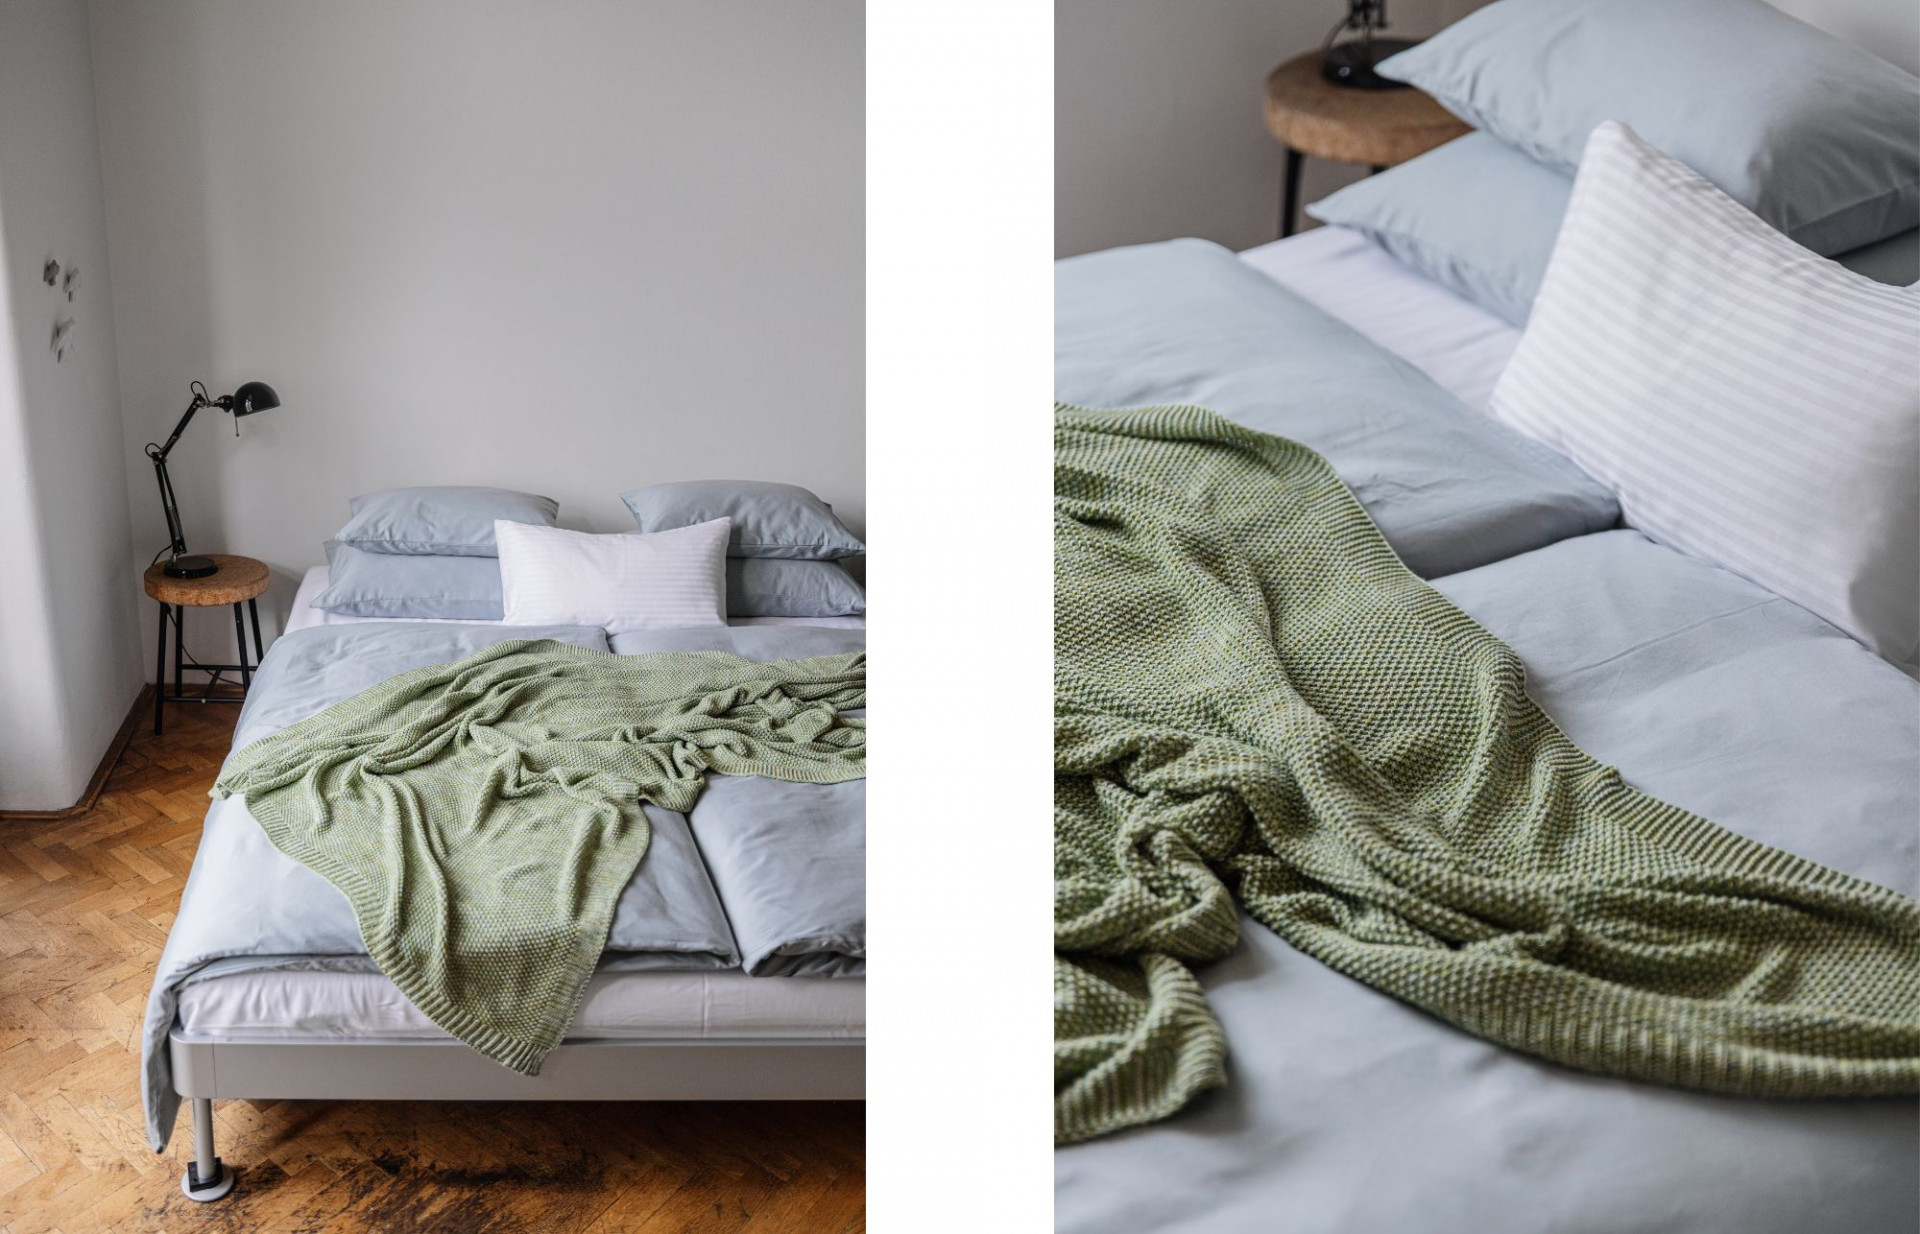 Afternoon Storm bed linen & Daily Notes pillow cover & Colour Melange blanket.